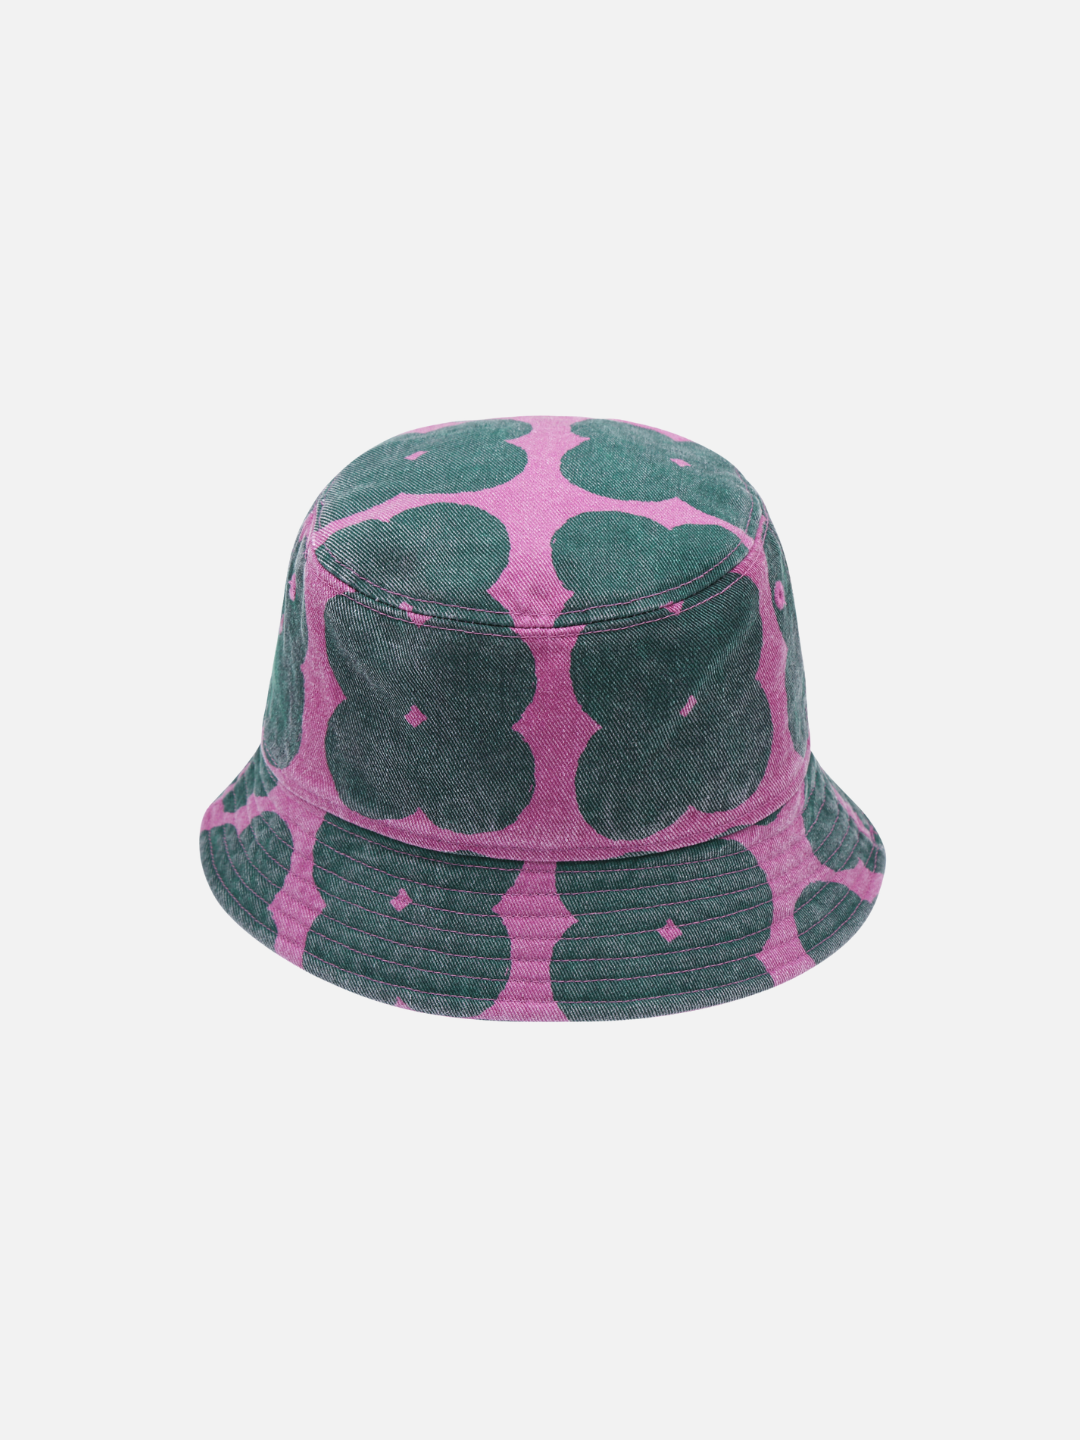 Rounded hat with brim. Faded dark green clover shapes with a magenta background.